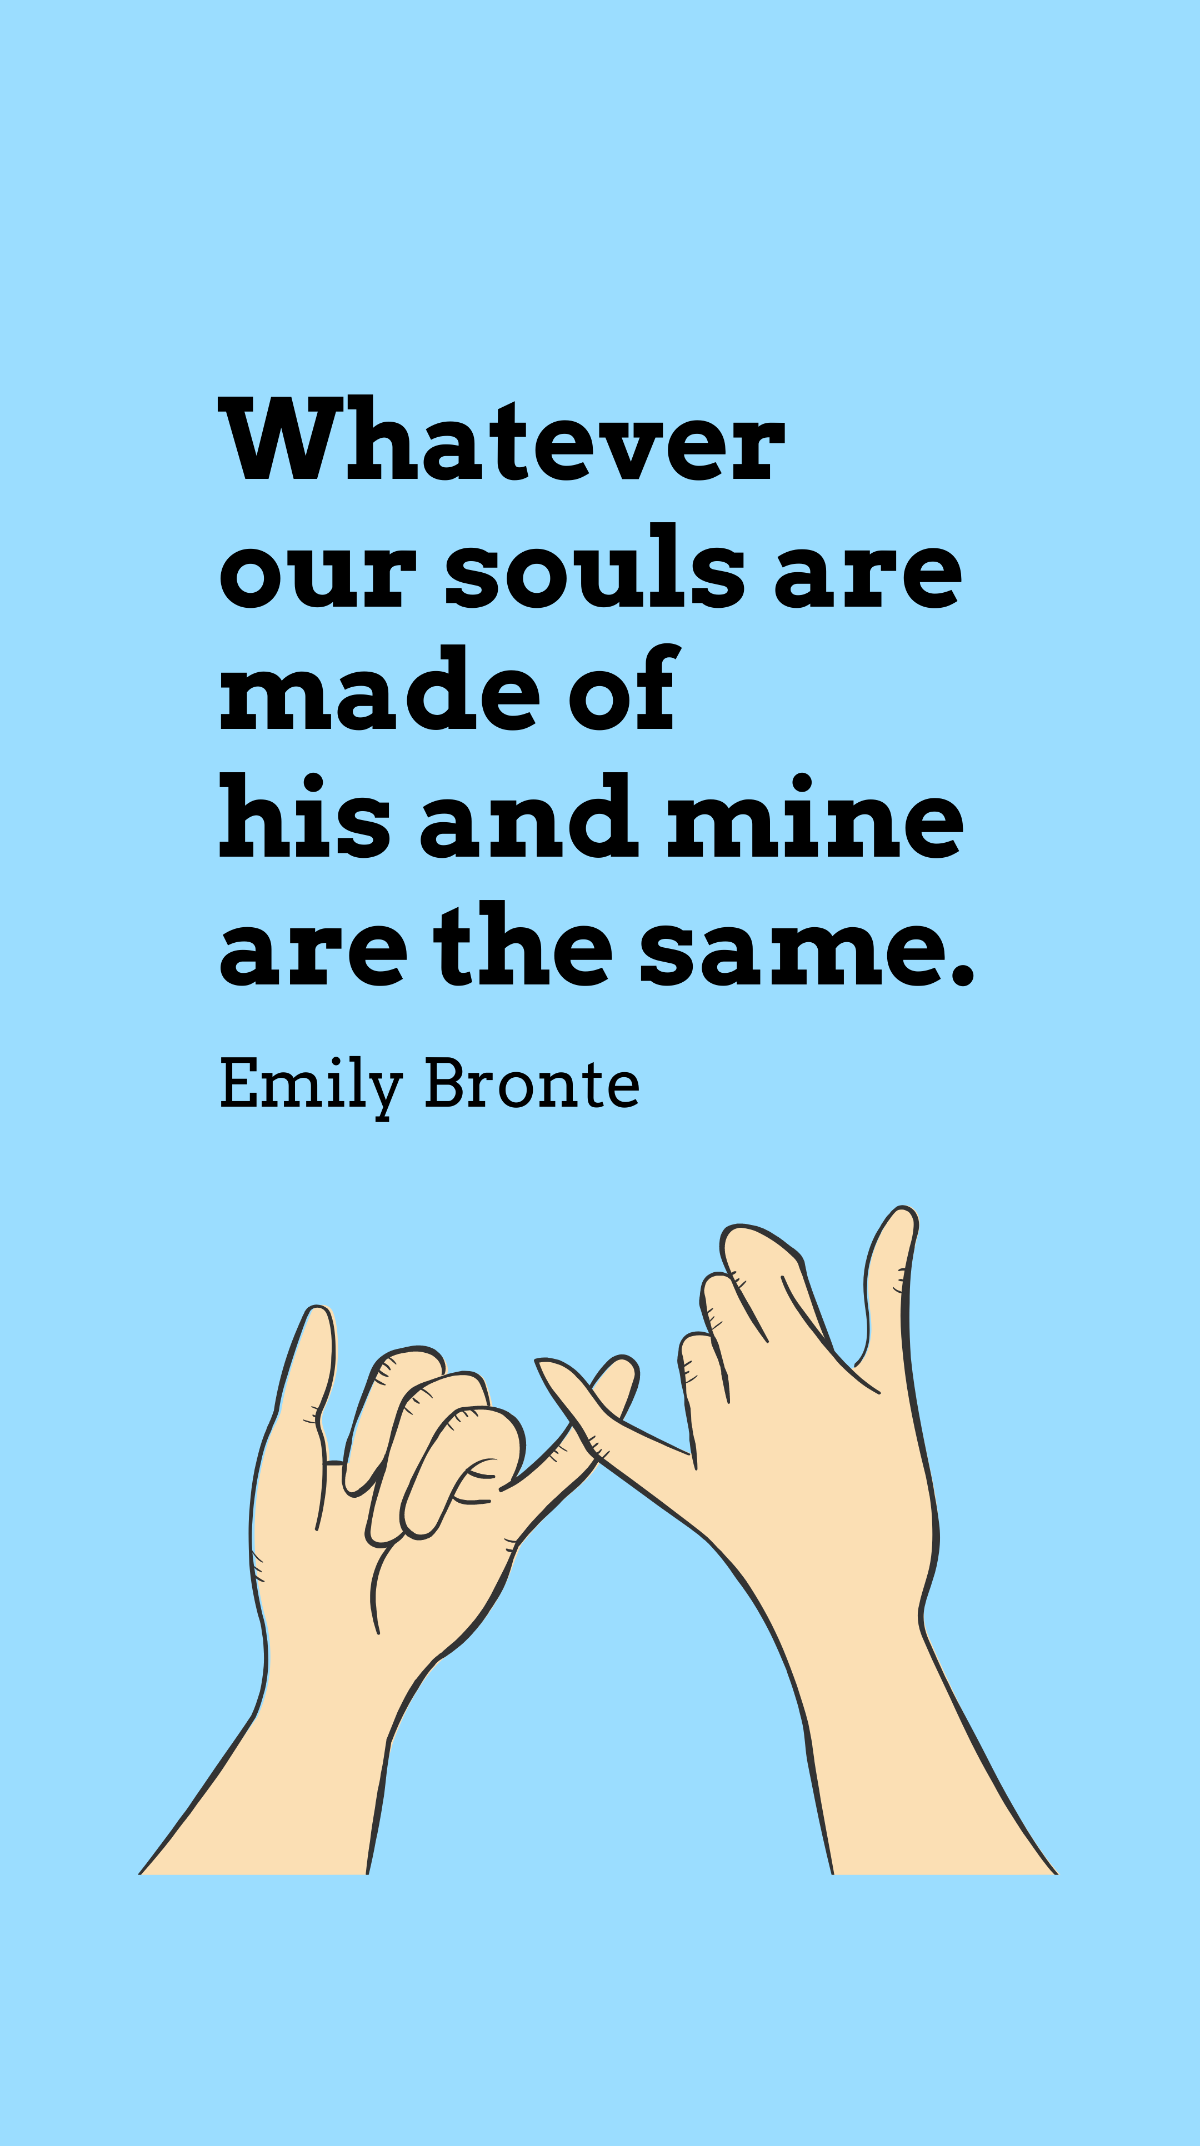 Free Emily Bronte - Whatever our souls are made of his and mine are the same. Template